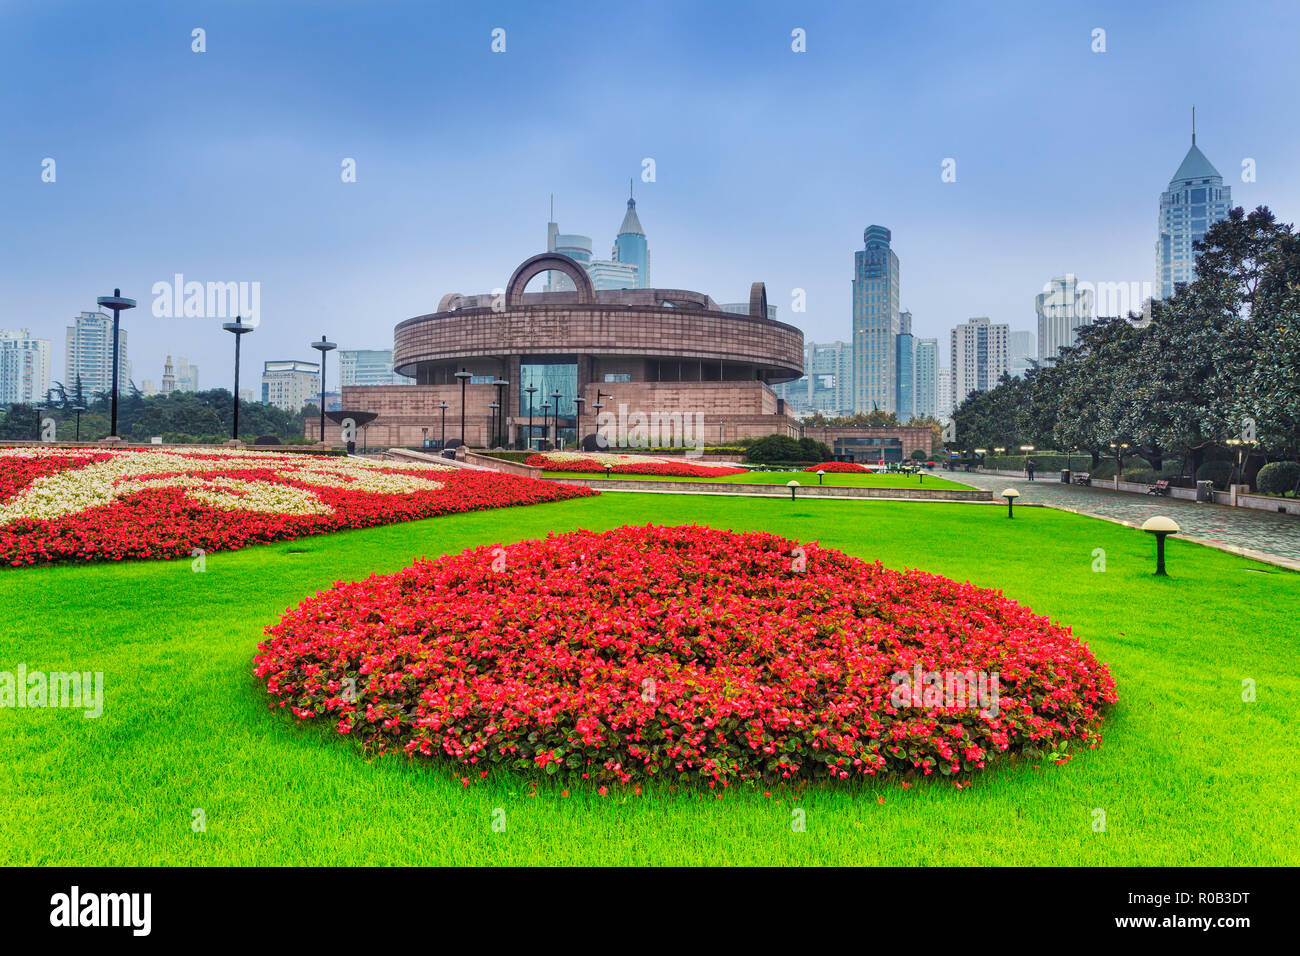 Shanghai People's square and surroundings architecture around the park in early morning. Green grass and round flowers in front of historic building. Stock Photo